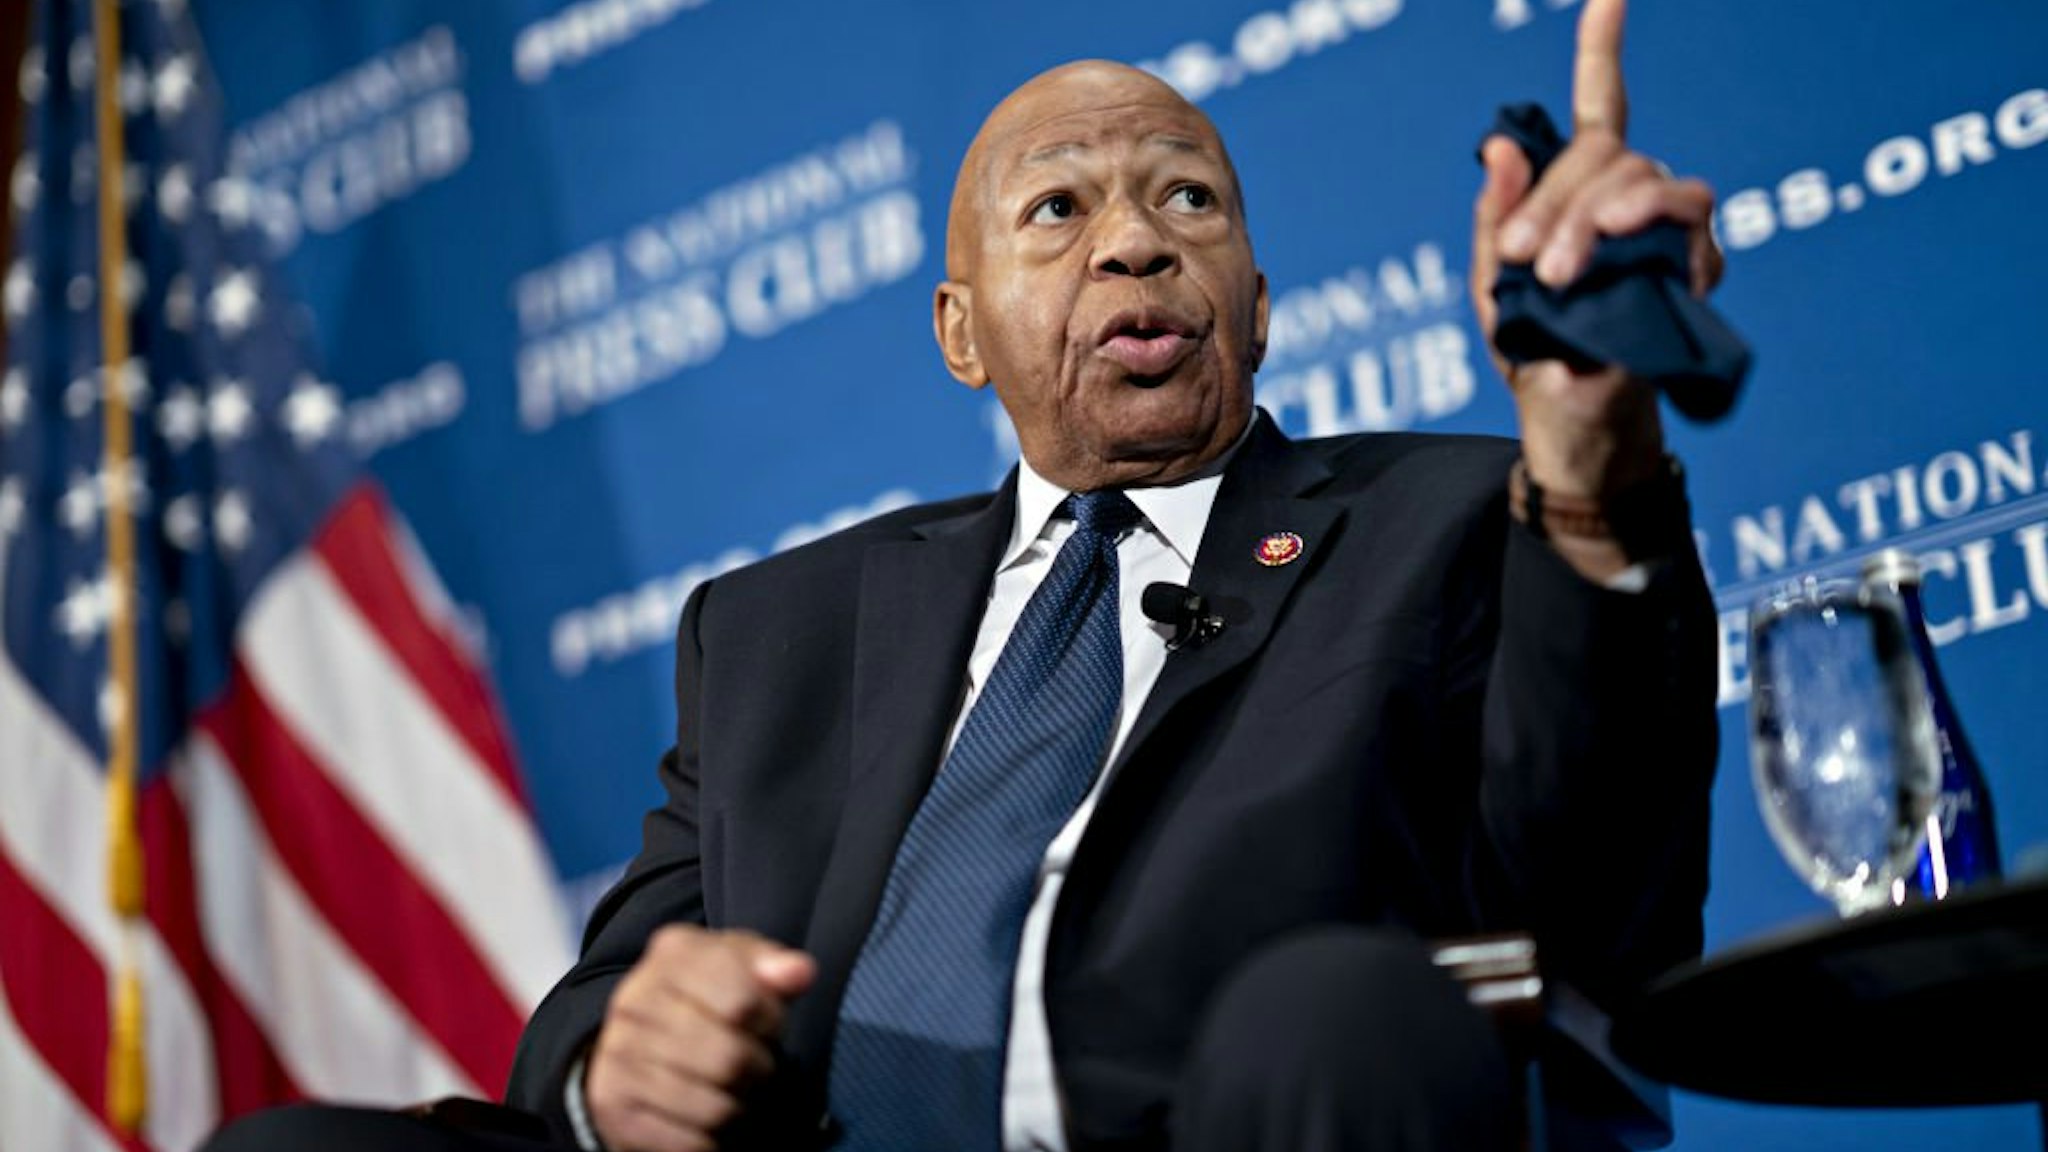 Elijah Cummings, a Democrat from Maryland and chairman of the House Oversight Committee, speaks during a National Press Club event